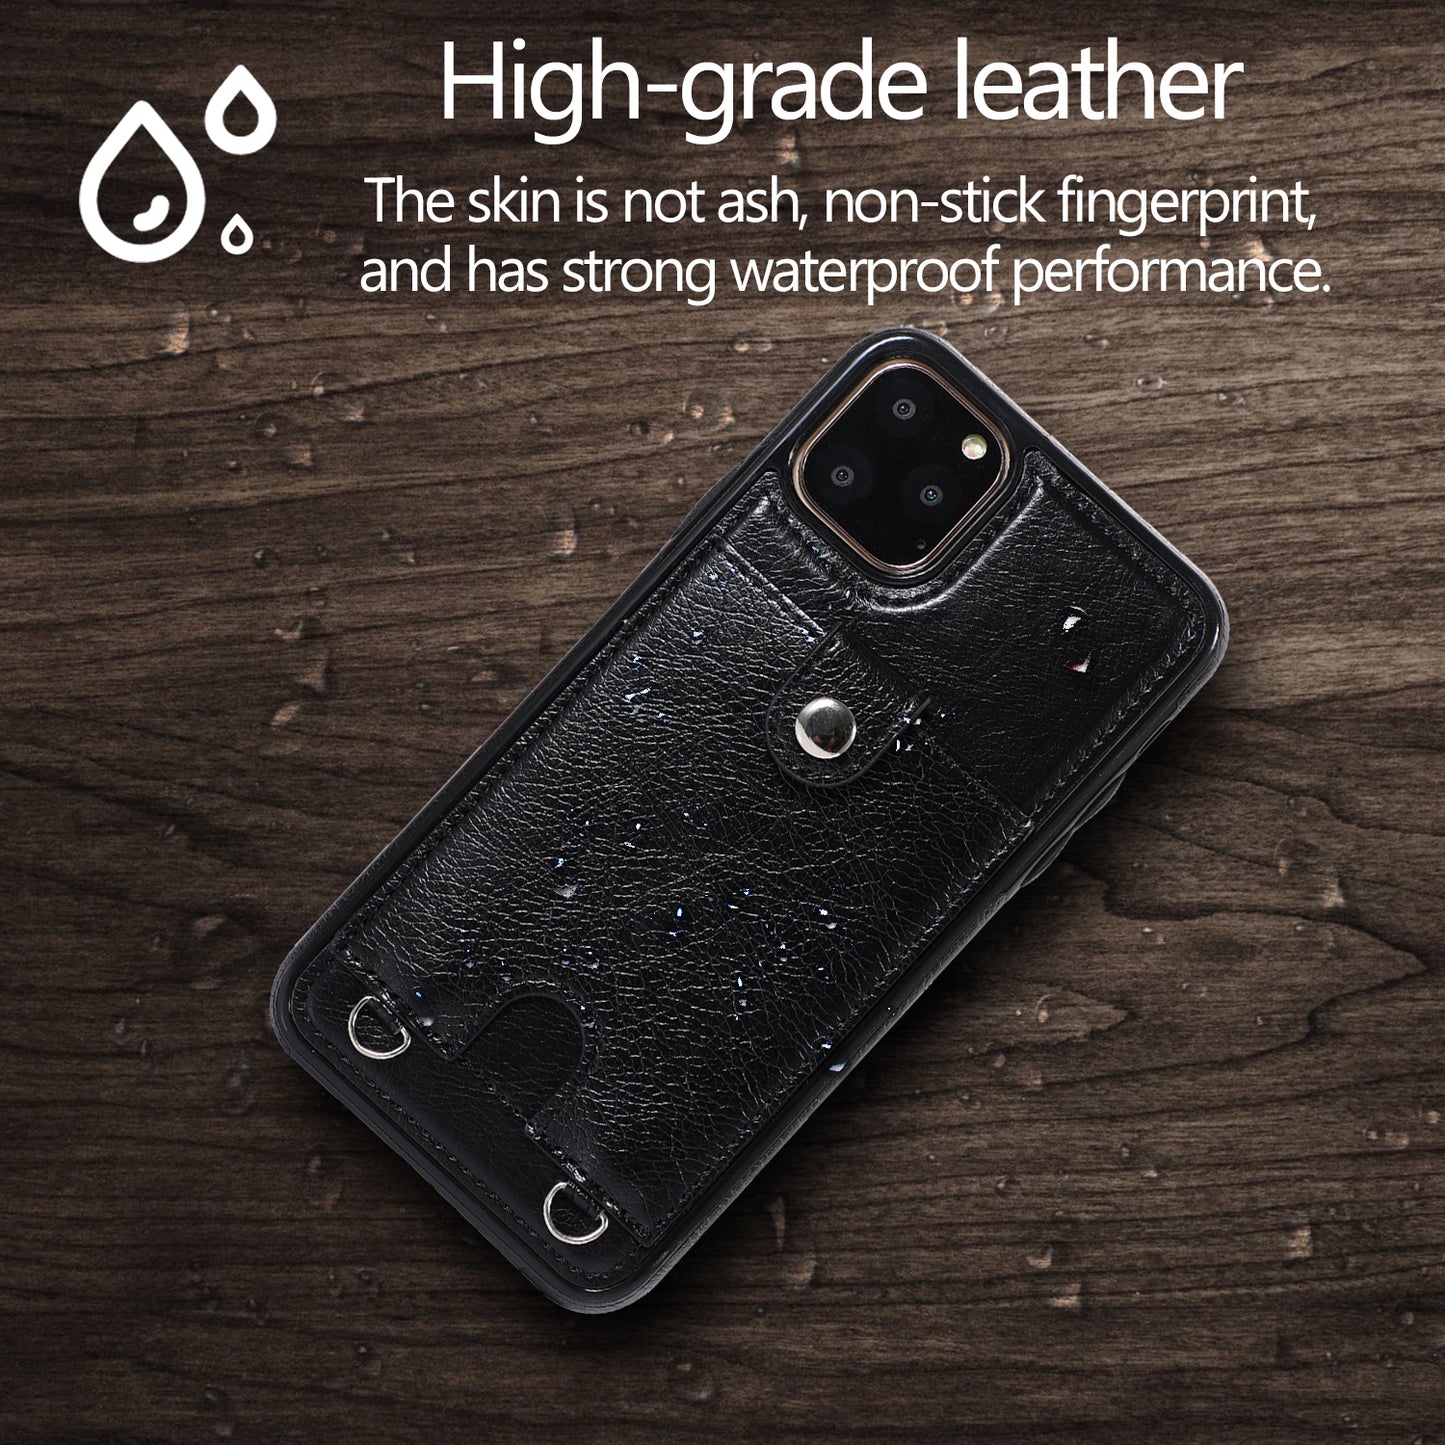 Customizable Leather iPhone Case Wallet with Shoulder Strap for iPhone 13/ iPhone 12/ iPhone 11/ iPhone XS/ iPhone 8/ iPhone 7/ iPhone SE 2nd